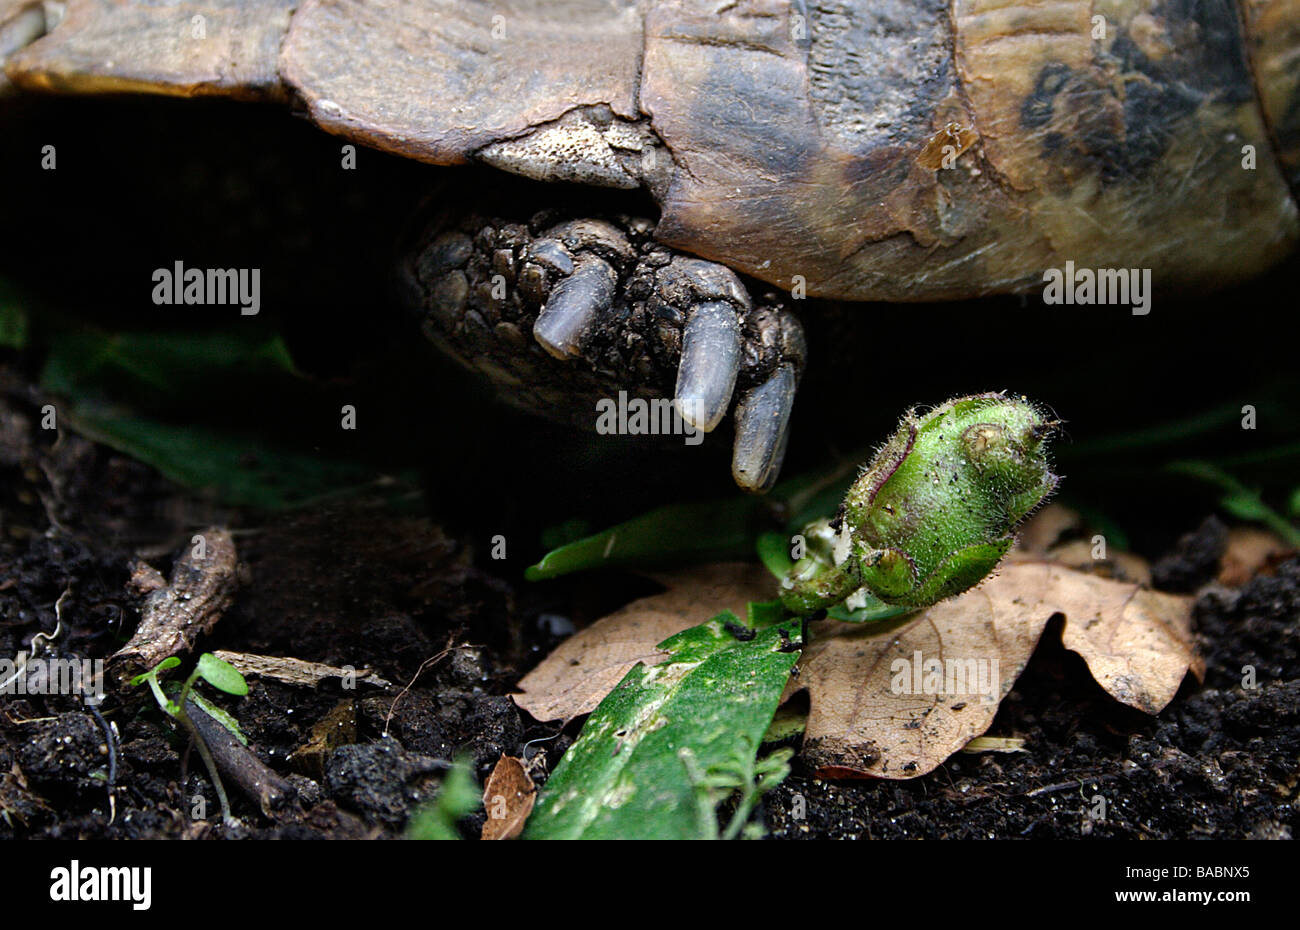 close up of claws of tortoise moving around in garden Stock Photo